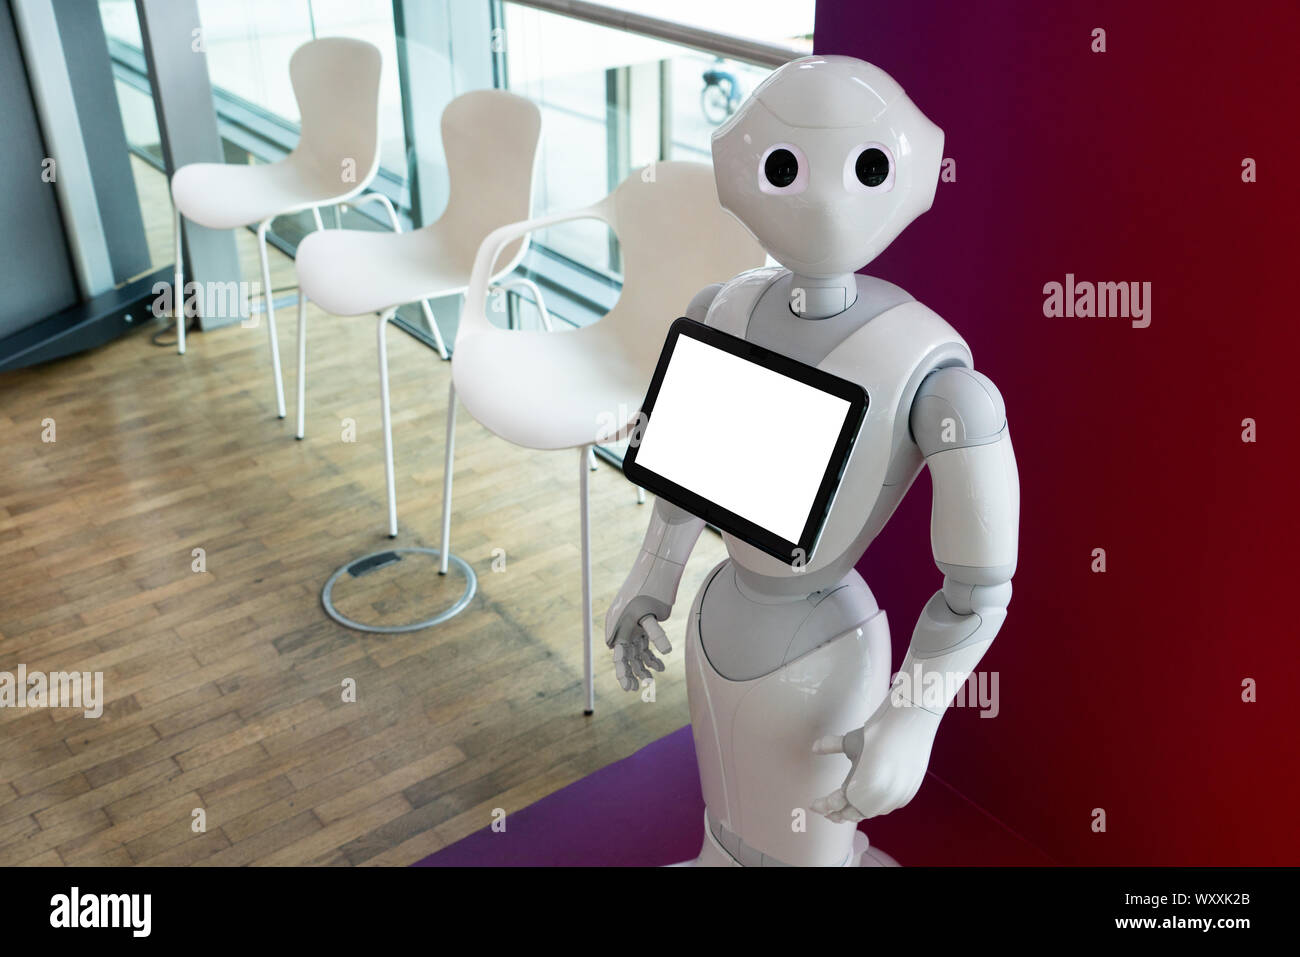 Robot consultant with touch screen Stock Photo